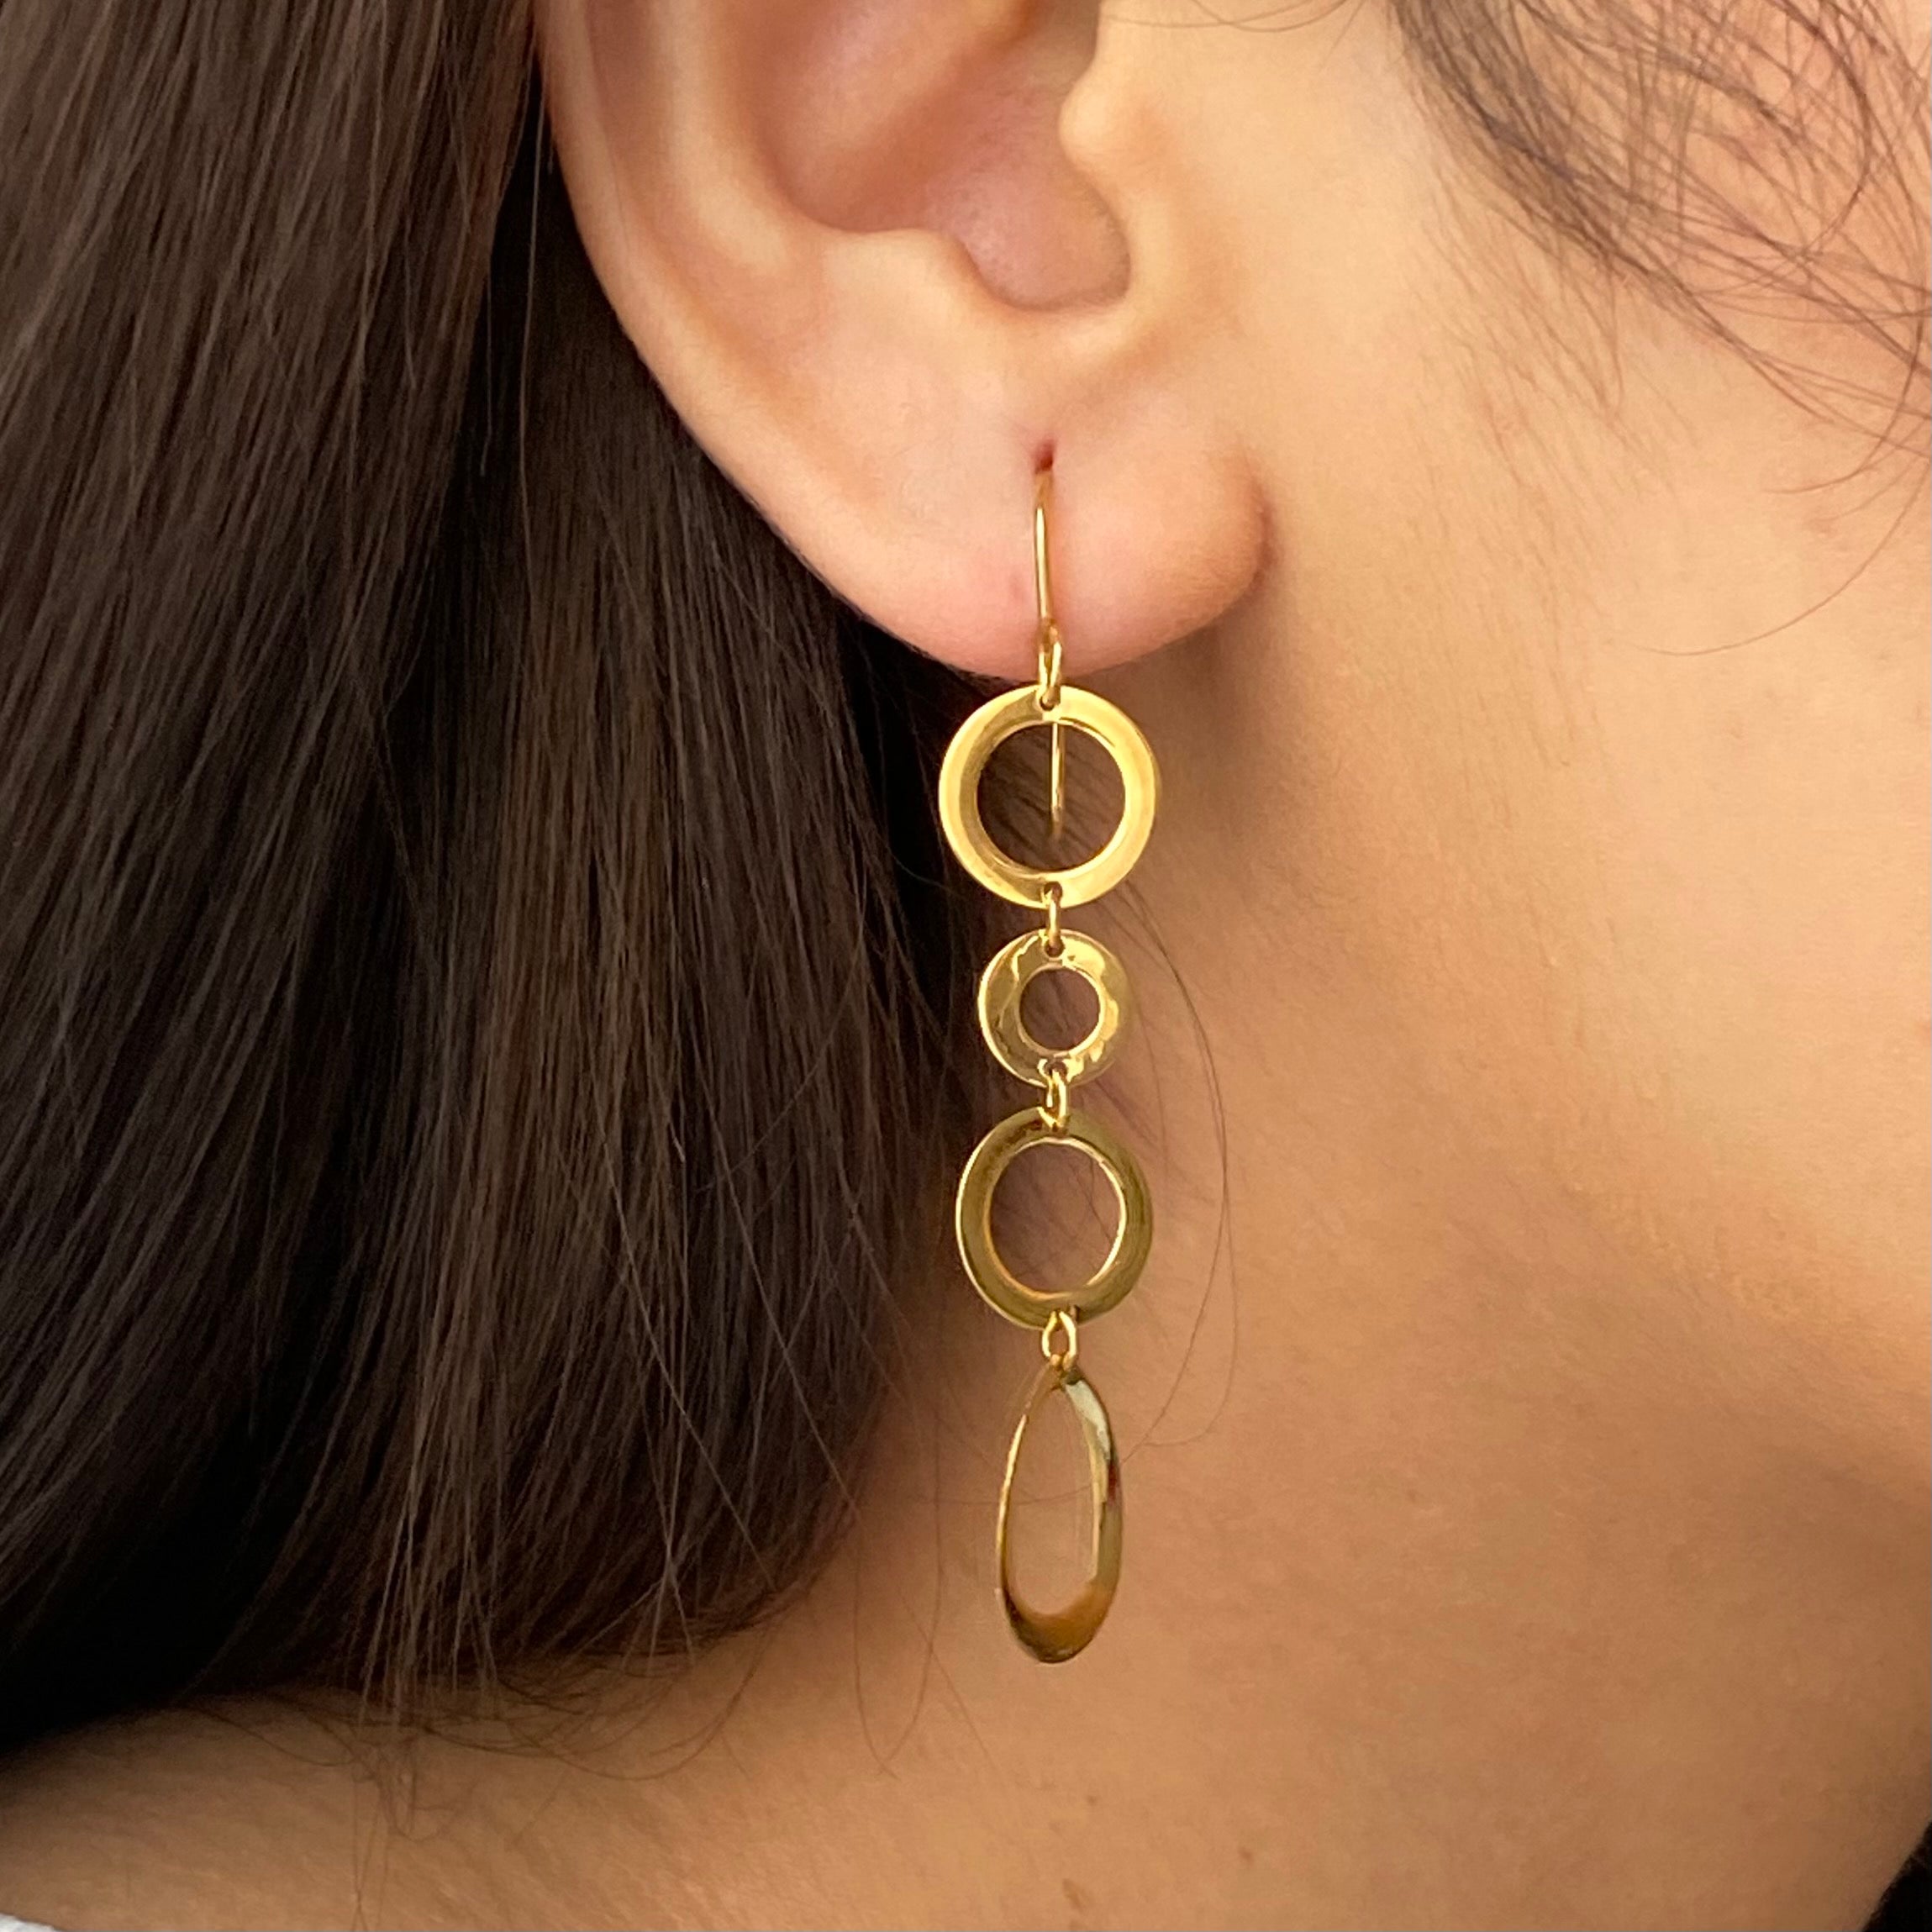 Gold Plated Sterling Silver Long Earrings with Round and Tear Drop Shaped Rings